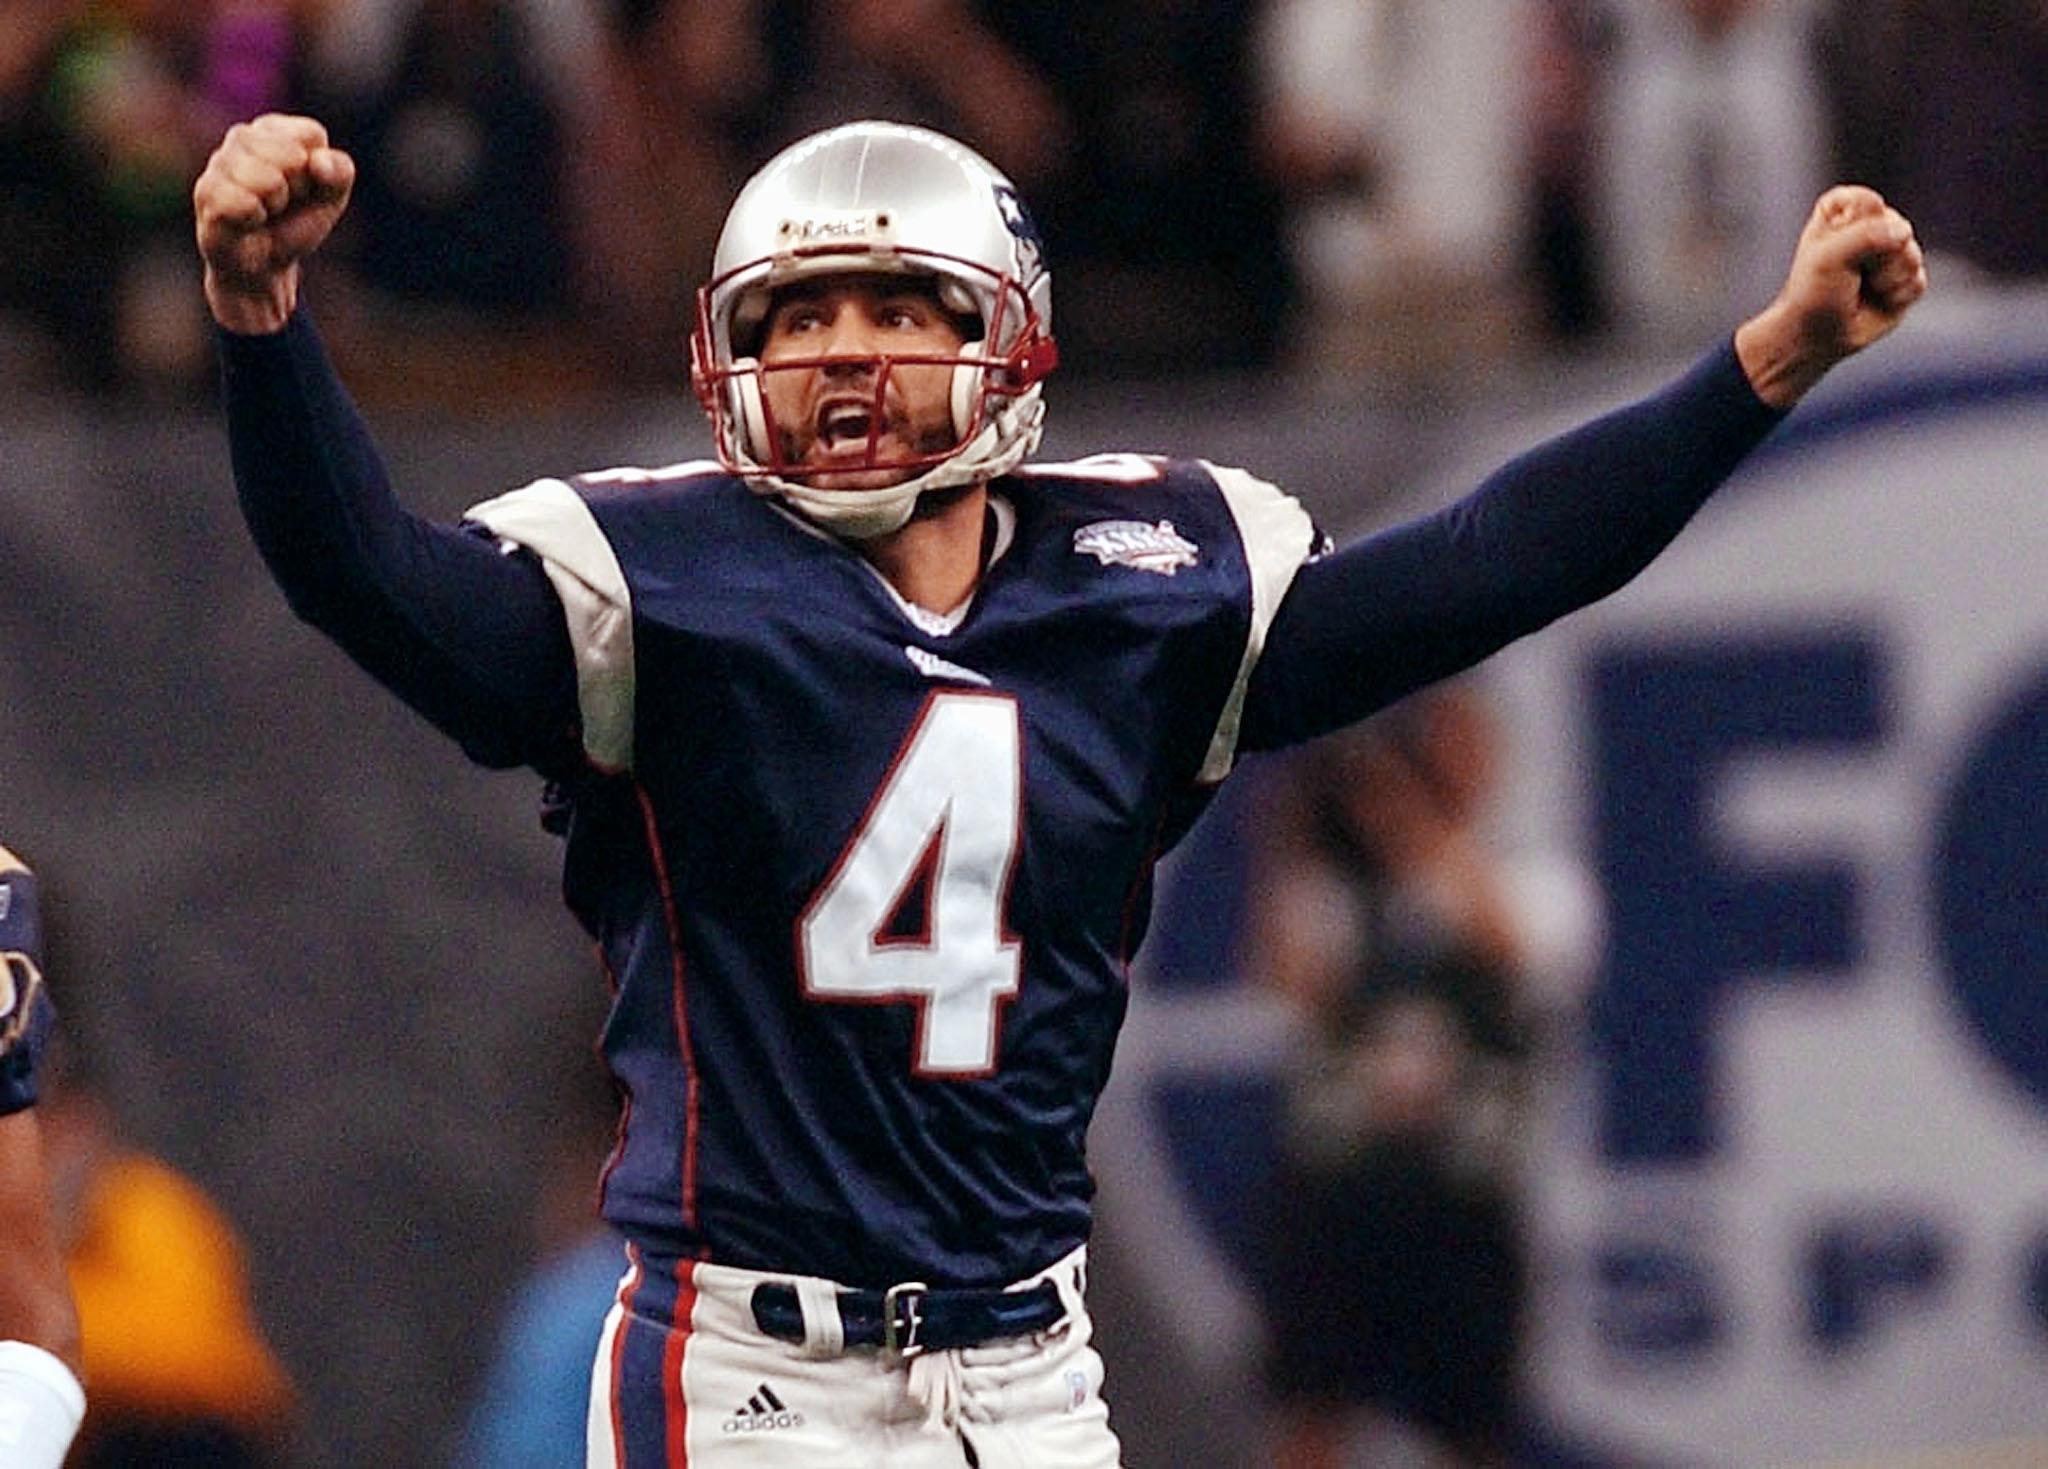 New England Patriots kicker Adam Vinatieri celebrates his game-winning field goal in the second half 03 February, 2002 of Super Bowl XXXVI in New Orleans, Louisiana. The Patriots defeated the St. Louis Rams 20-17 for the NFL championship.